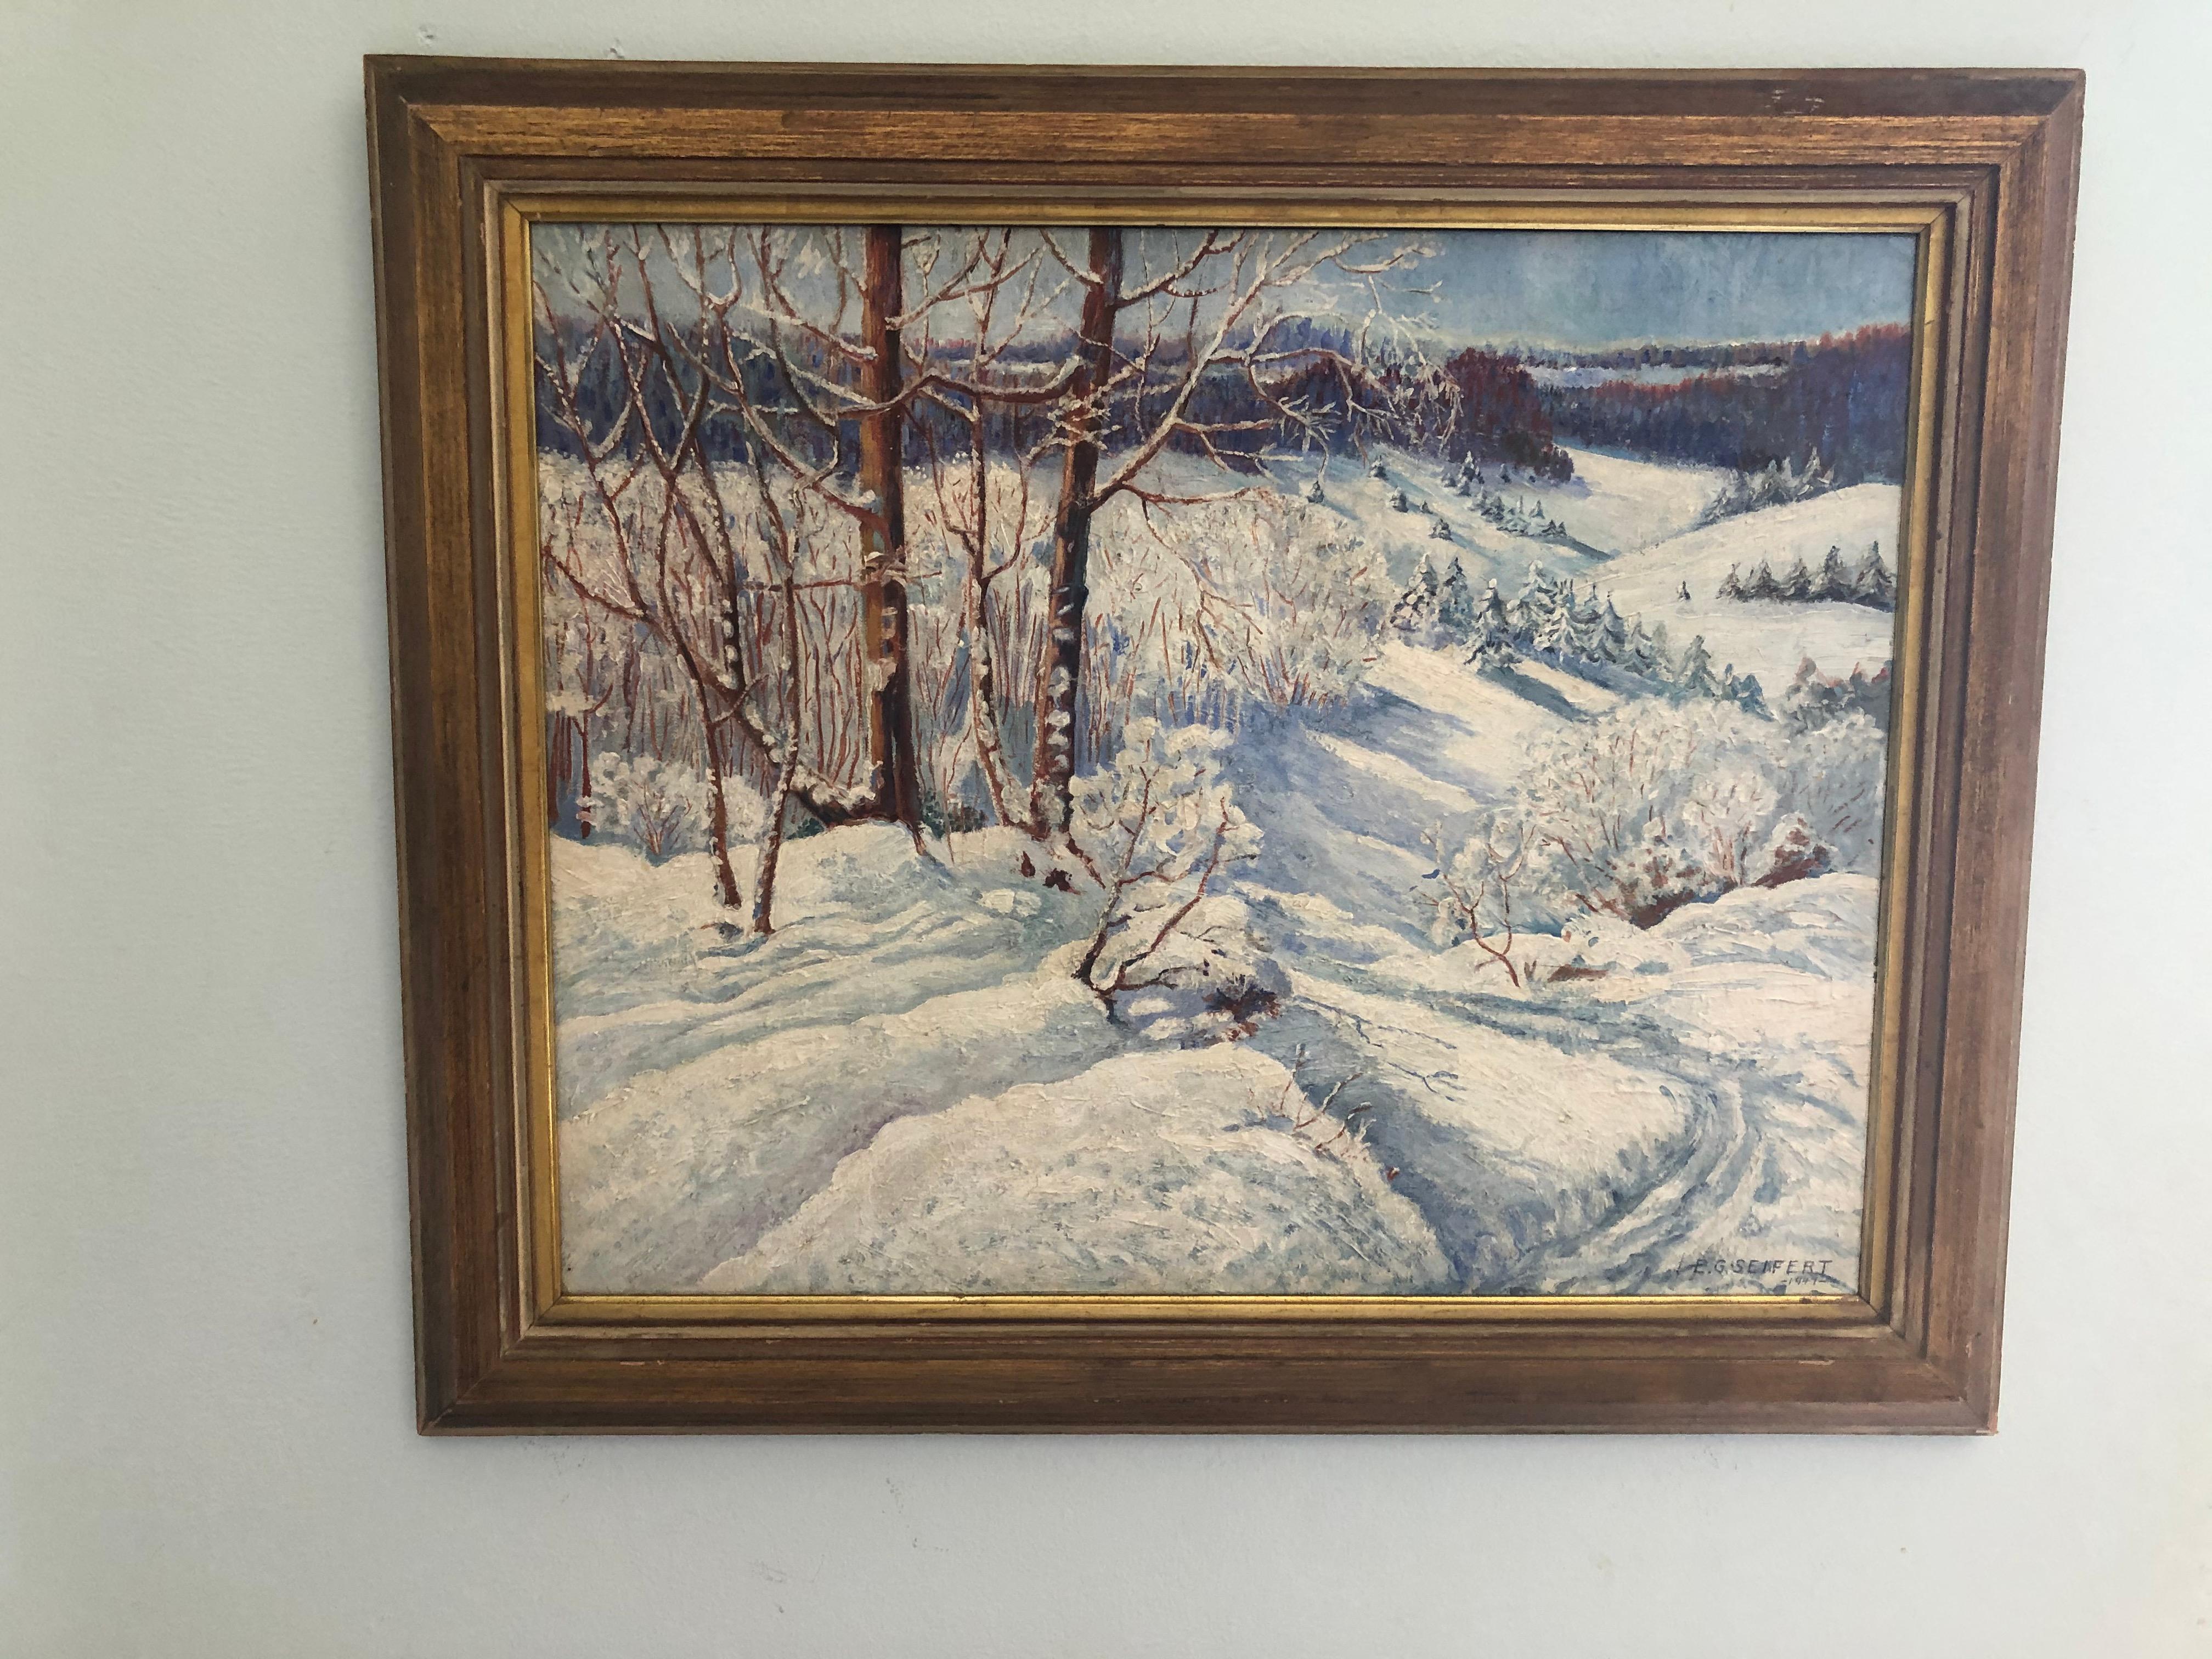 1947 American Winter Landscape - Gray Landscape Painting by Unknown